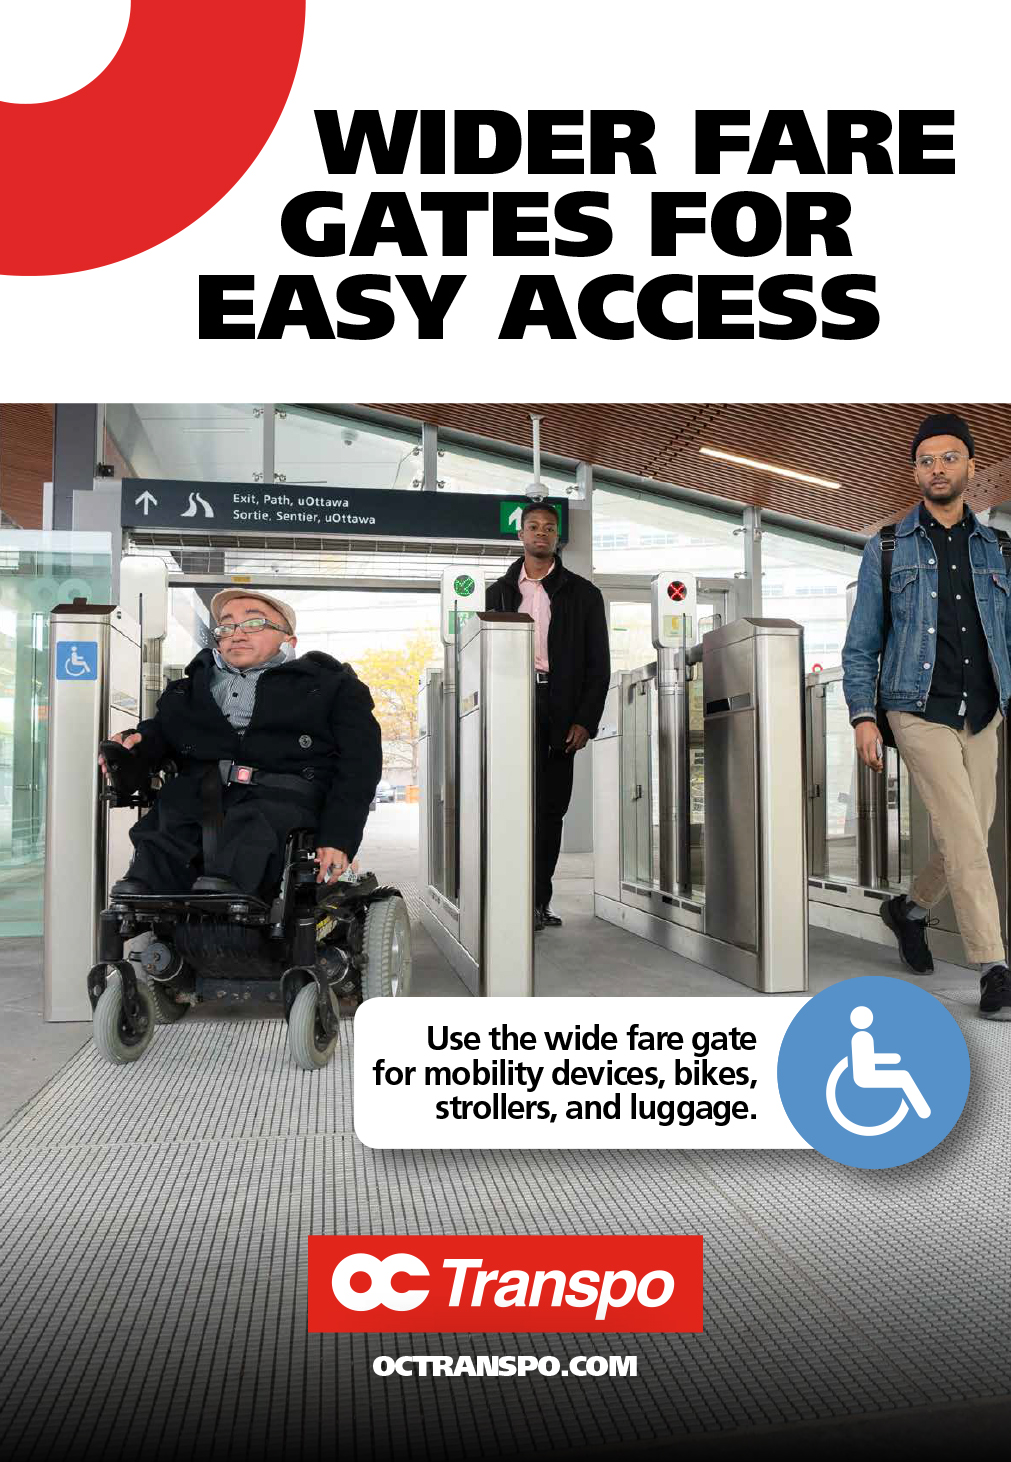 Man in an electric wheelchair going through the wider, accessible fare gate. Image text: Wider fare gates for easy access. Use the wide fare gate for mobility devices, bikes, strollers and luggage